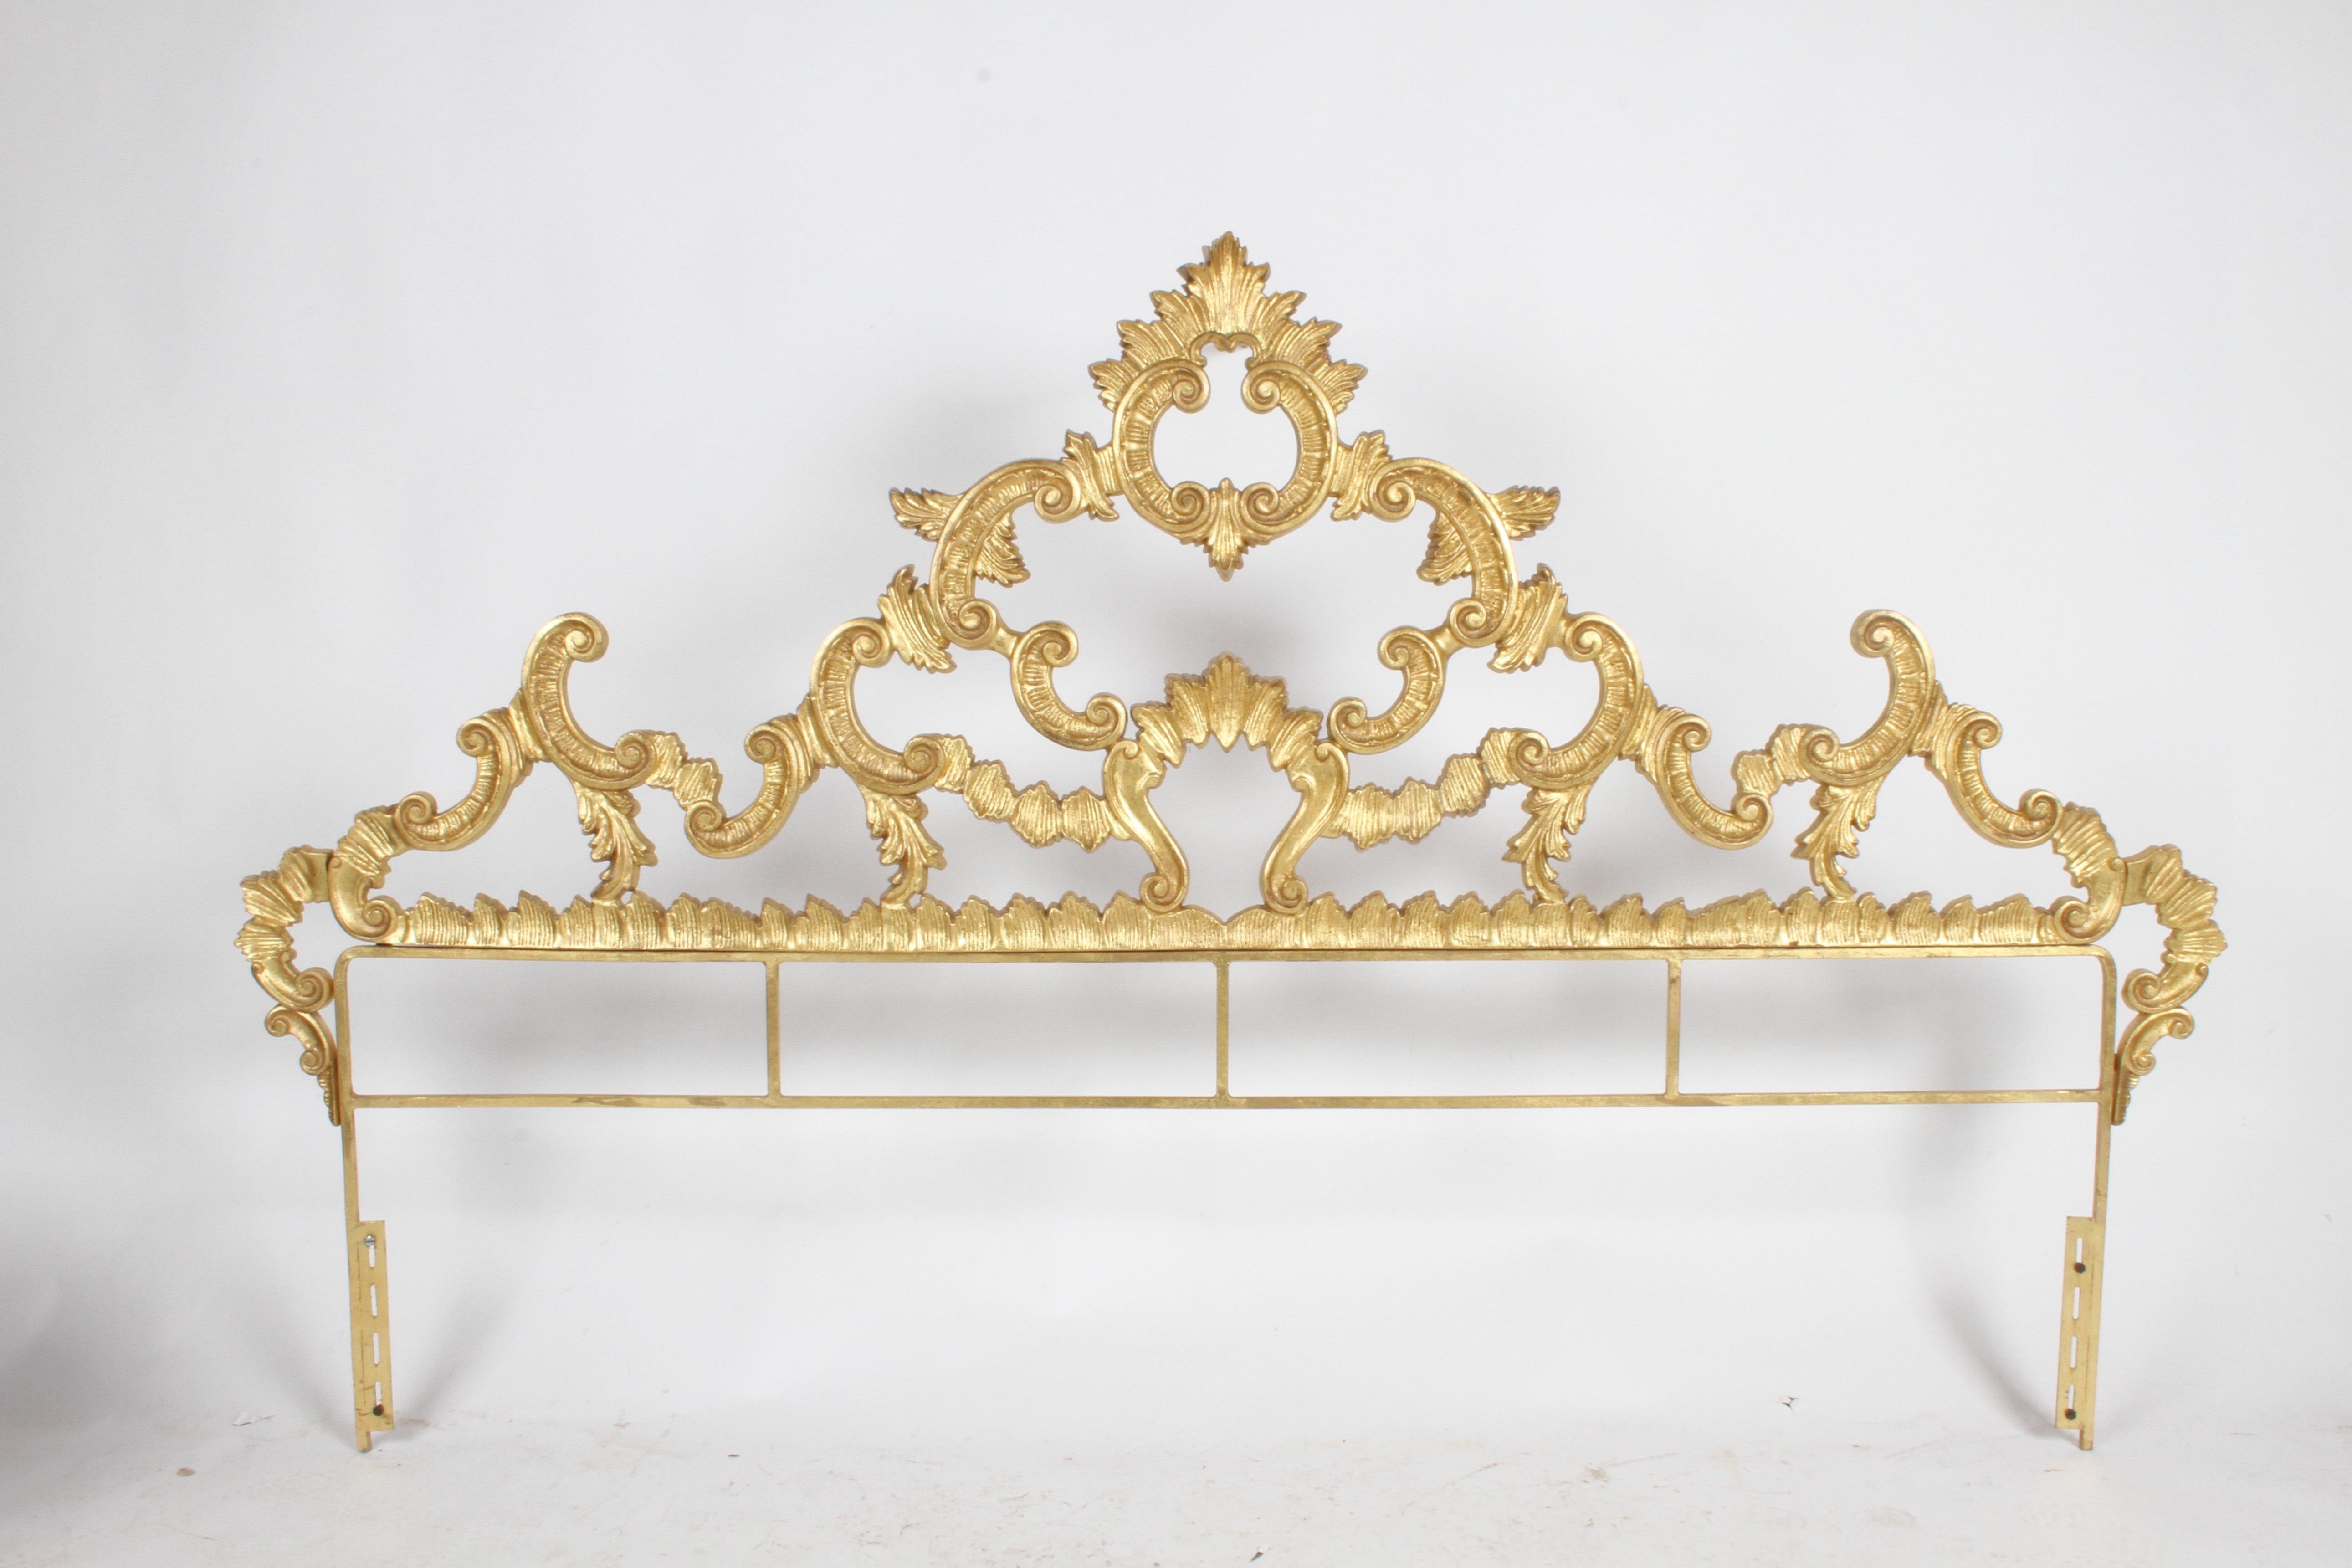 Very Hollywood Regency, Italian Rococo style king headboard with gold gilt. Cast metal, appears to have original gold paint, made in Italy. In very nice condition, very little wear, no breaks. Glamorous!! Mounting hardware is 76